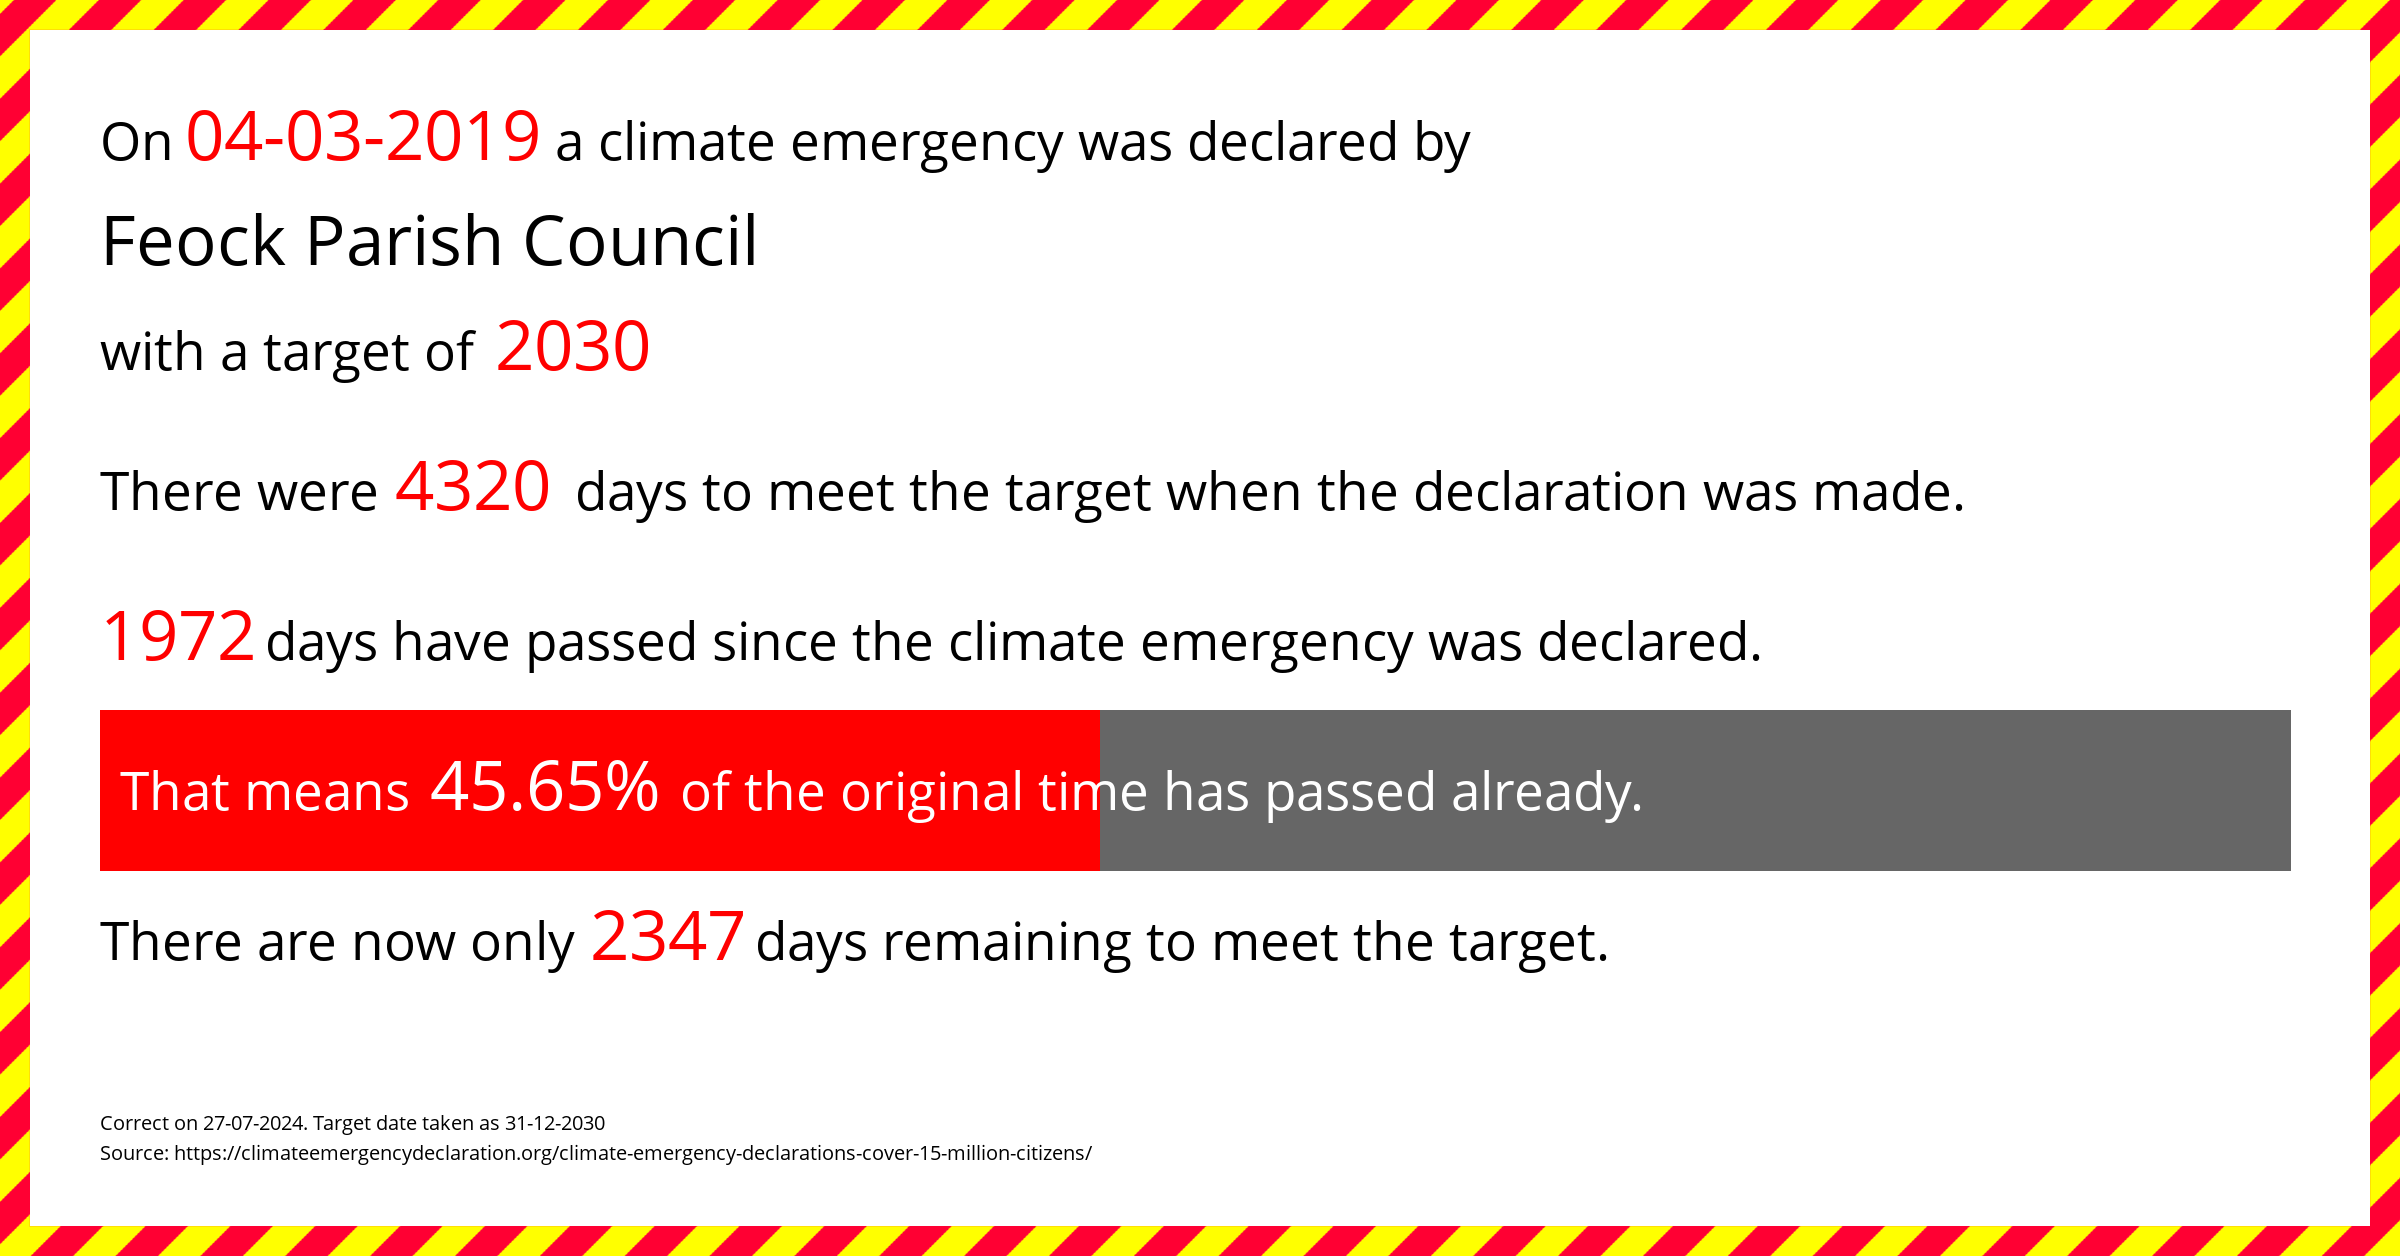 Feock Parish Council declared a Climate emergency on Monday 4th March 2019, with a target of 2030.